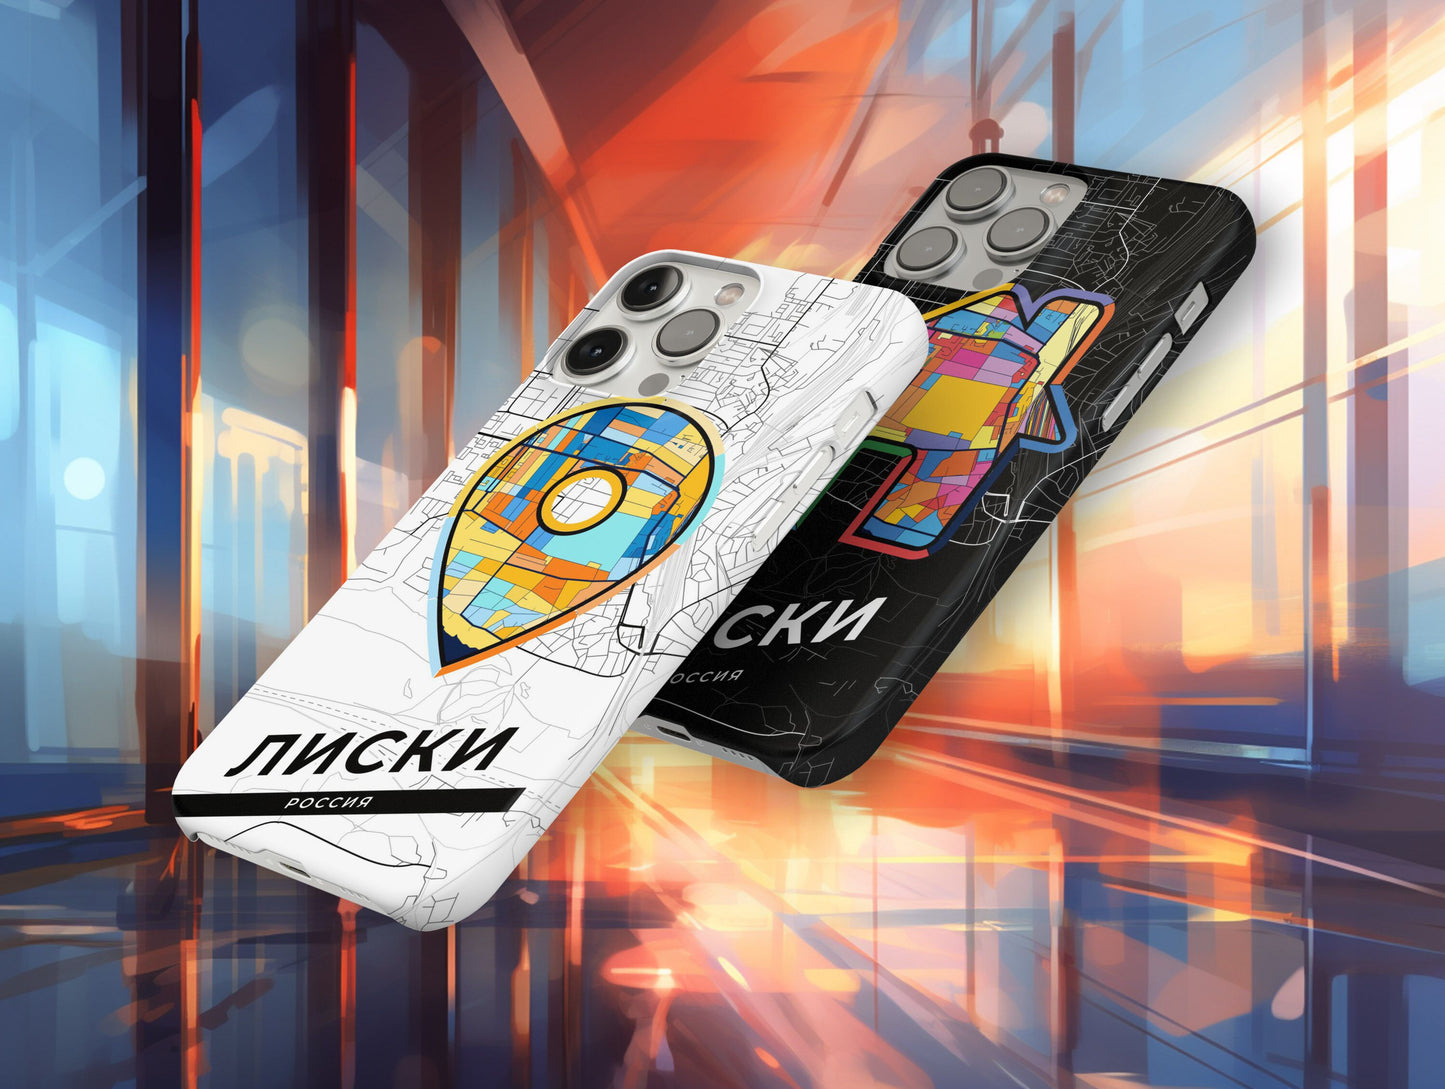 Liski Russia slim phone case with colorful icon. Birthday, wedding or housewarming gift. Couple match cases.